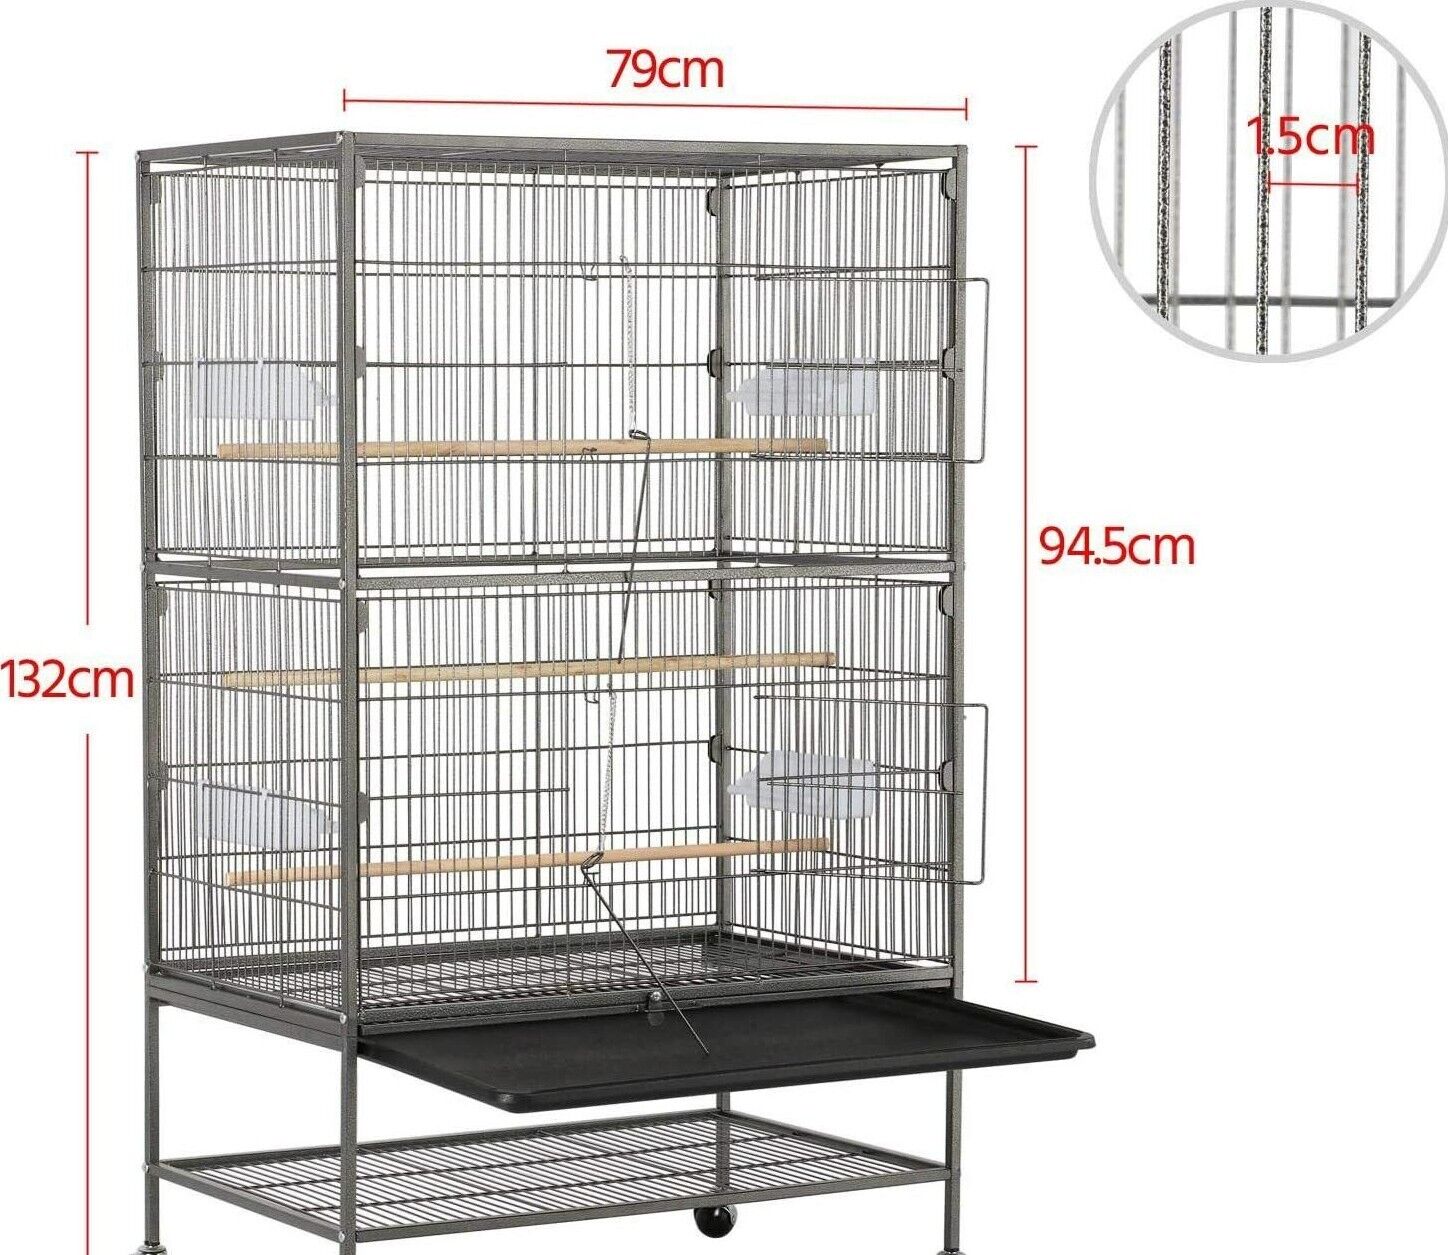 Extra Large 132cm Metal Parrot Cage For Cockatoo/Parrot/Lovebird With Trays UK